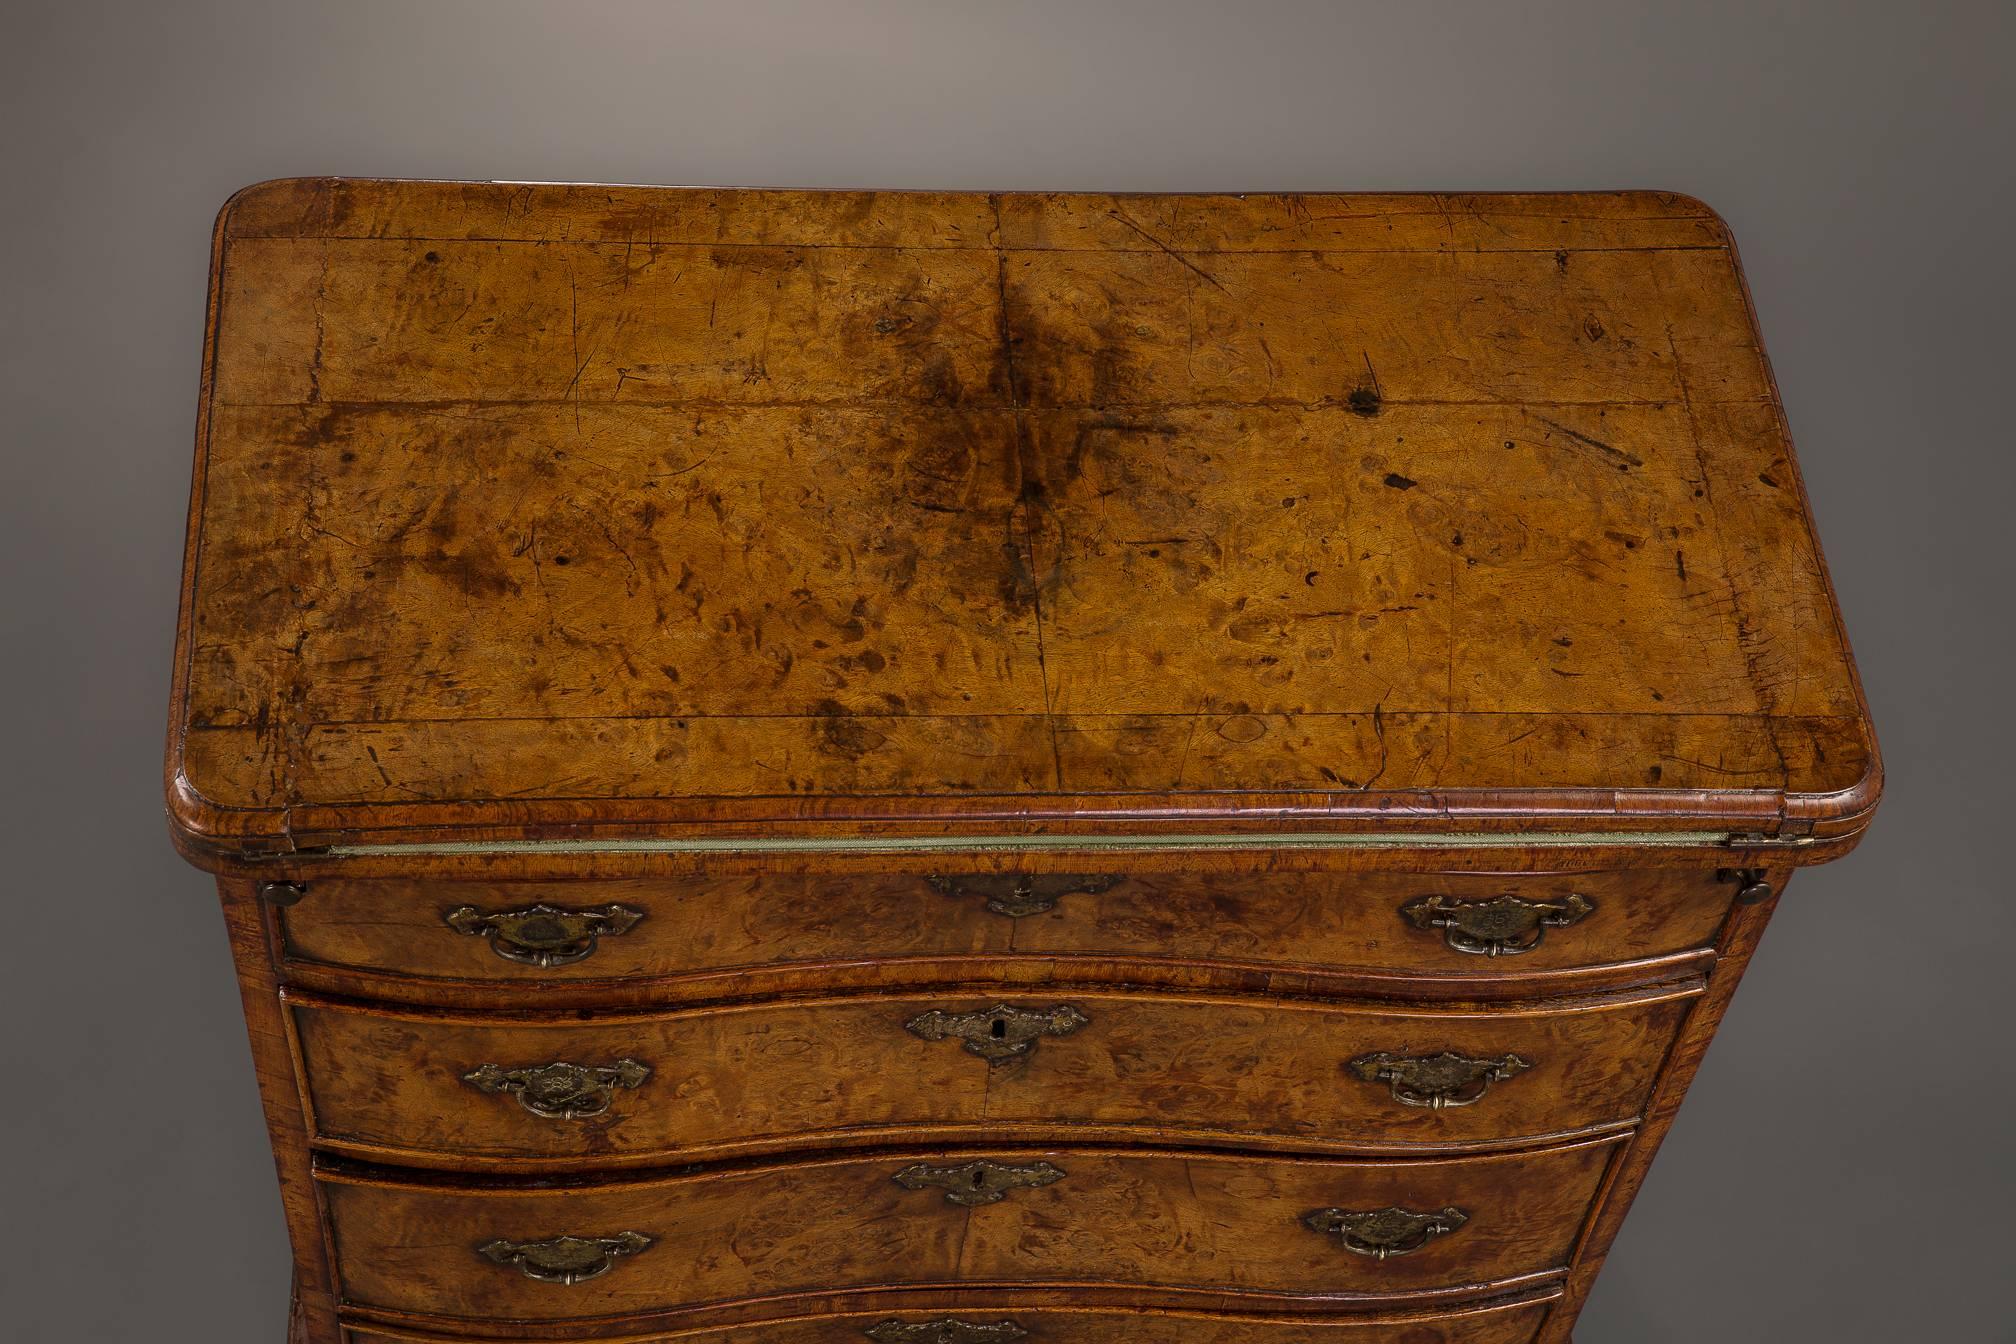 An exceptional bachelors chest of magnificent color and patination. The top quarter veneered in the finest burr walnut opening to a green velvet lining and revealing a lockable panel to an interior well reminiscent of case furniture of the 1690s.